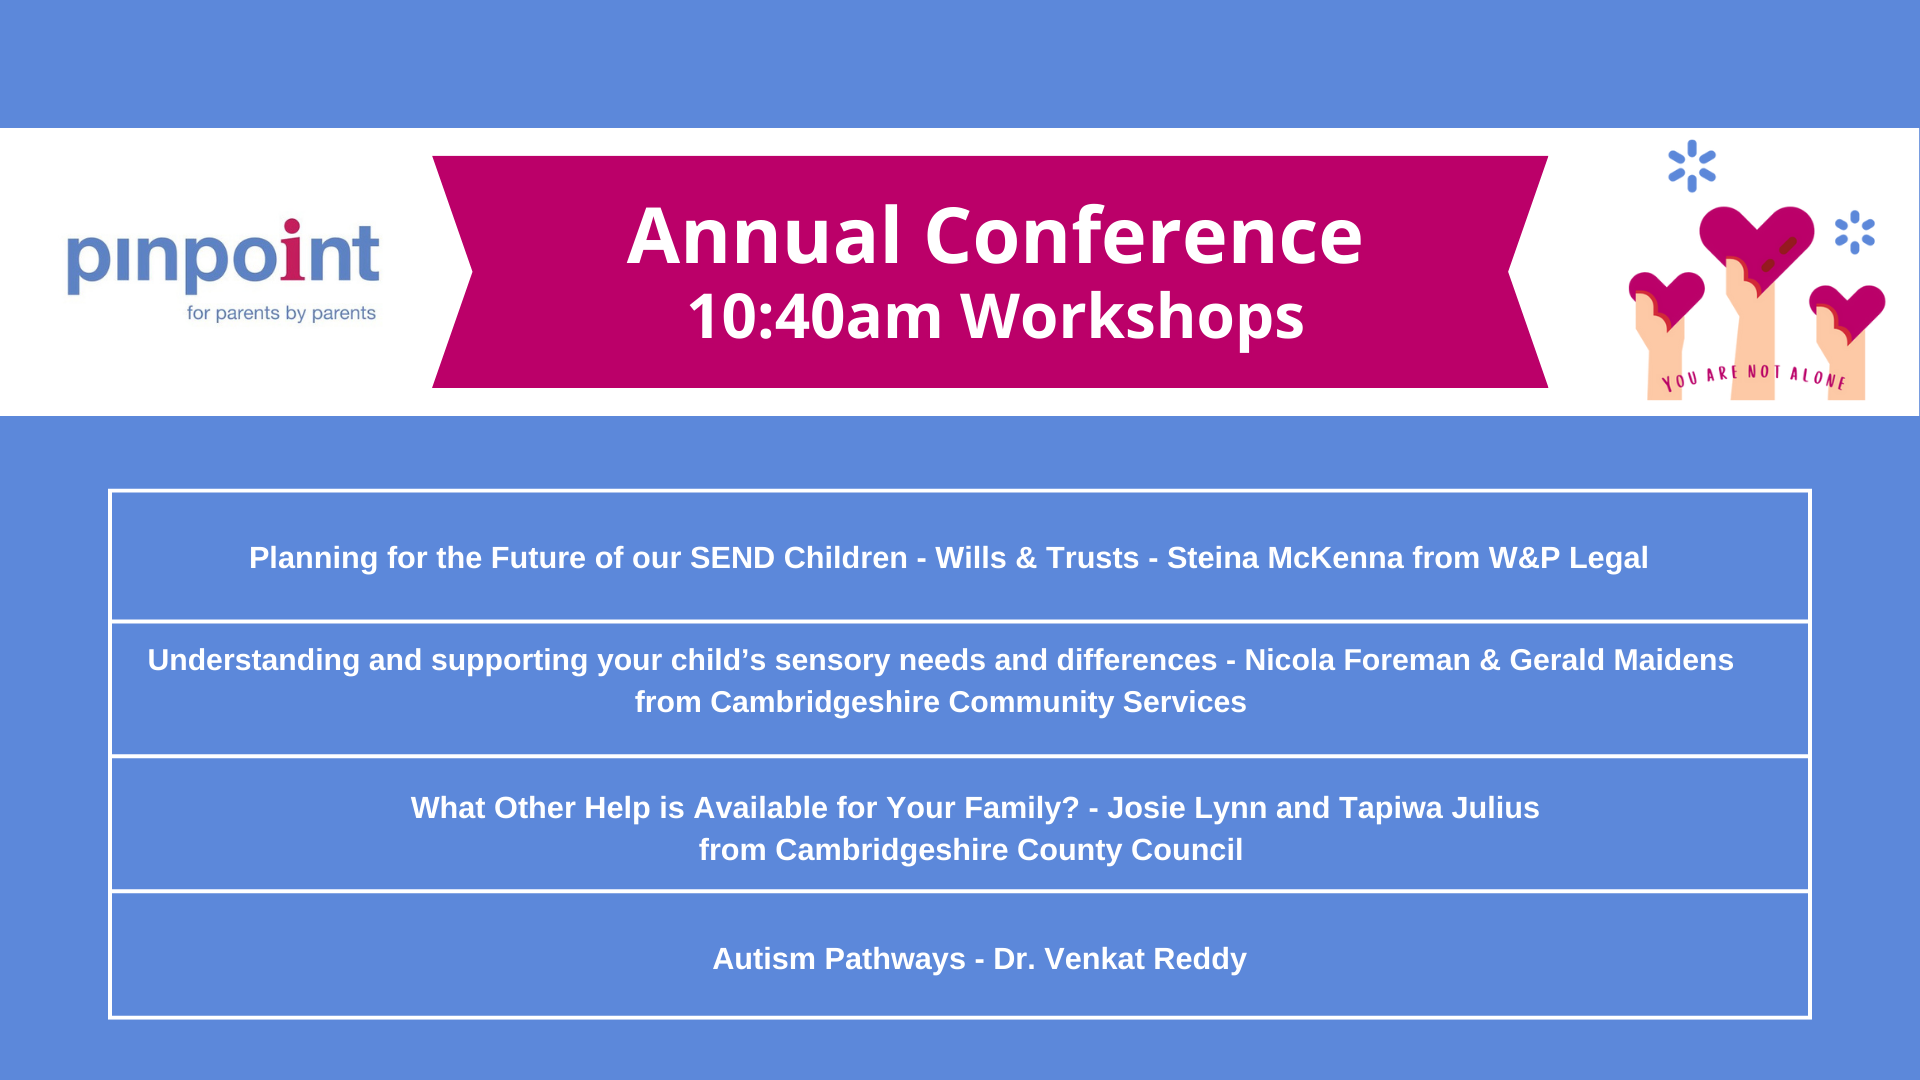 Annual Conference 10:40 Workshops